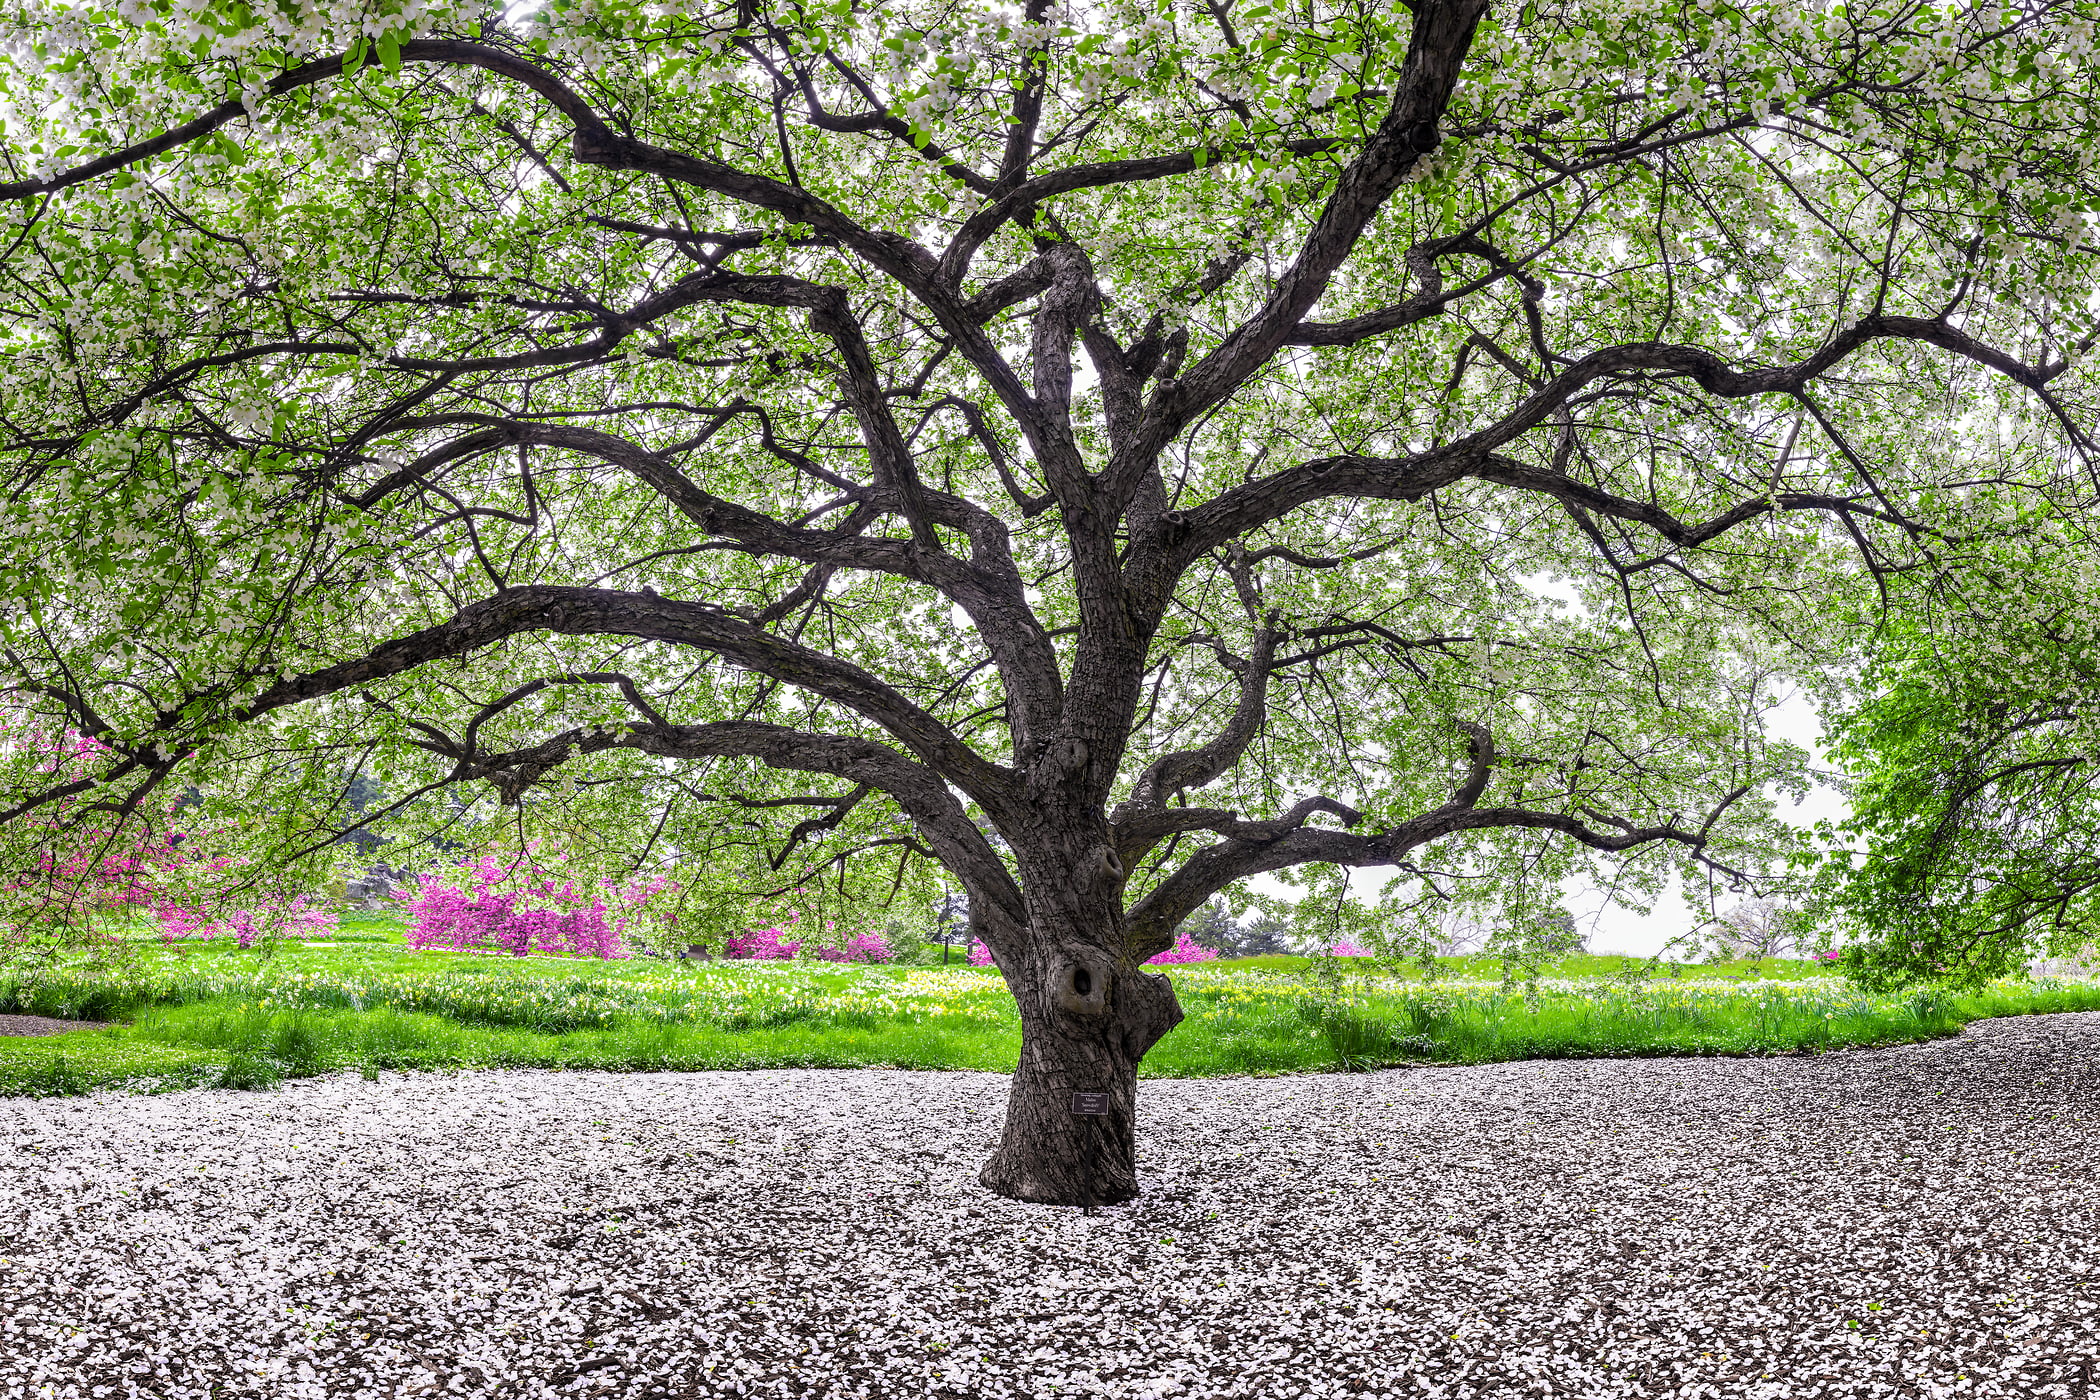 874 megapixels! A very high resolution, large-format VAST photo of a crabapple tree blooming in spring with blossom petals on the ground; fine art photograph created by Dan Piech in the New York Botanical Garden, New York City.